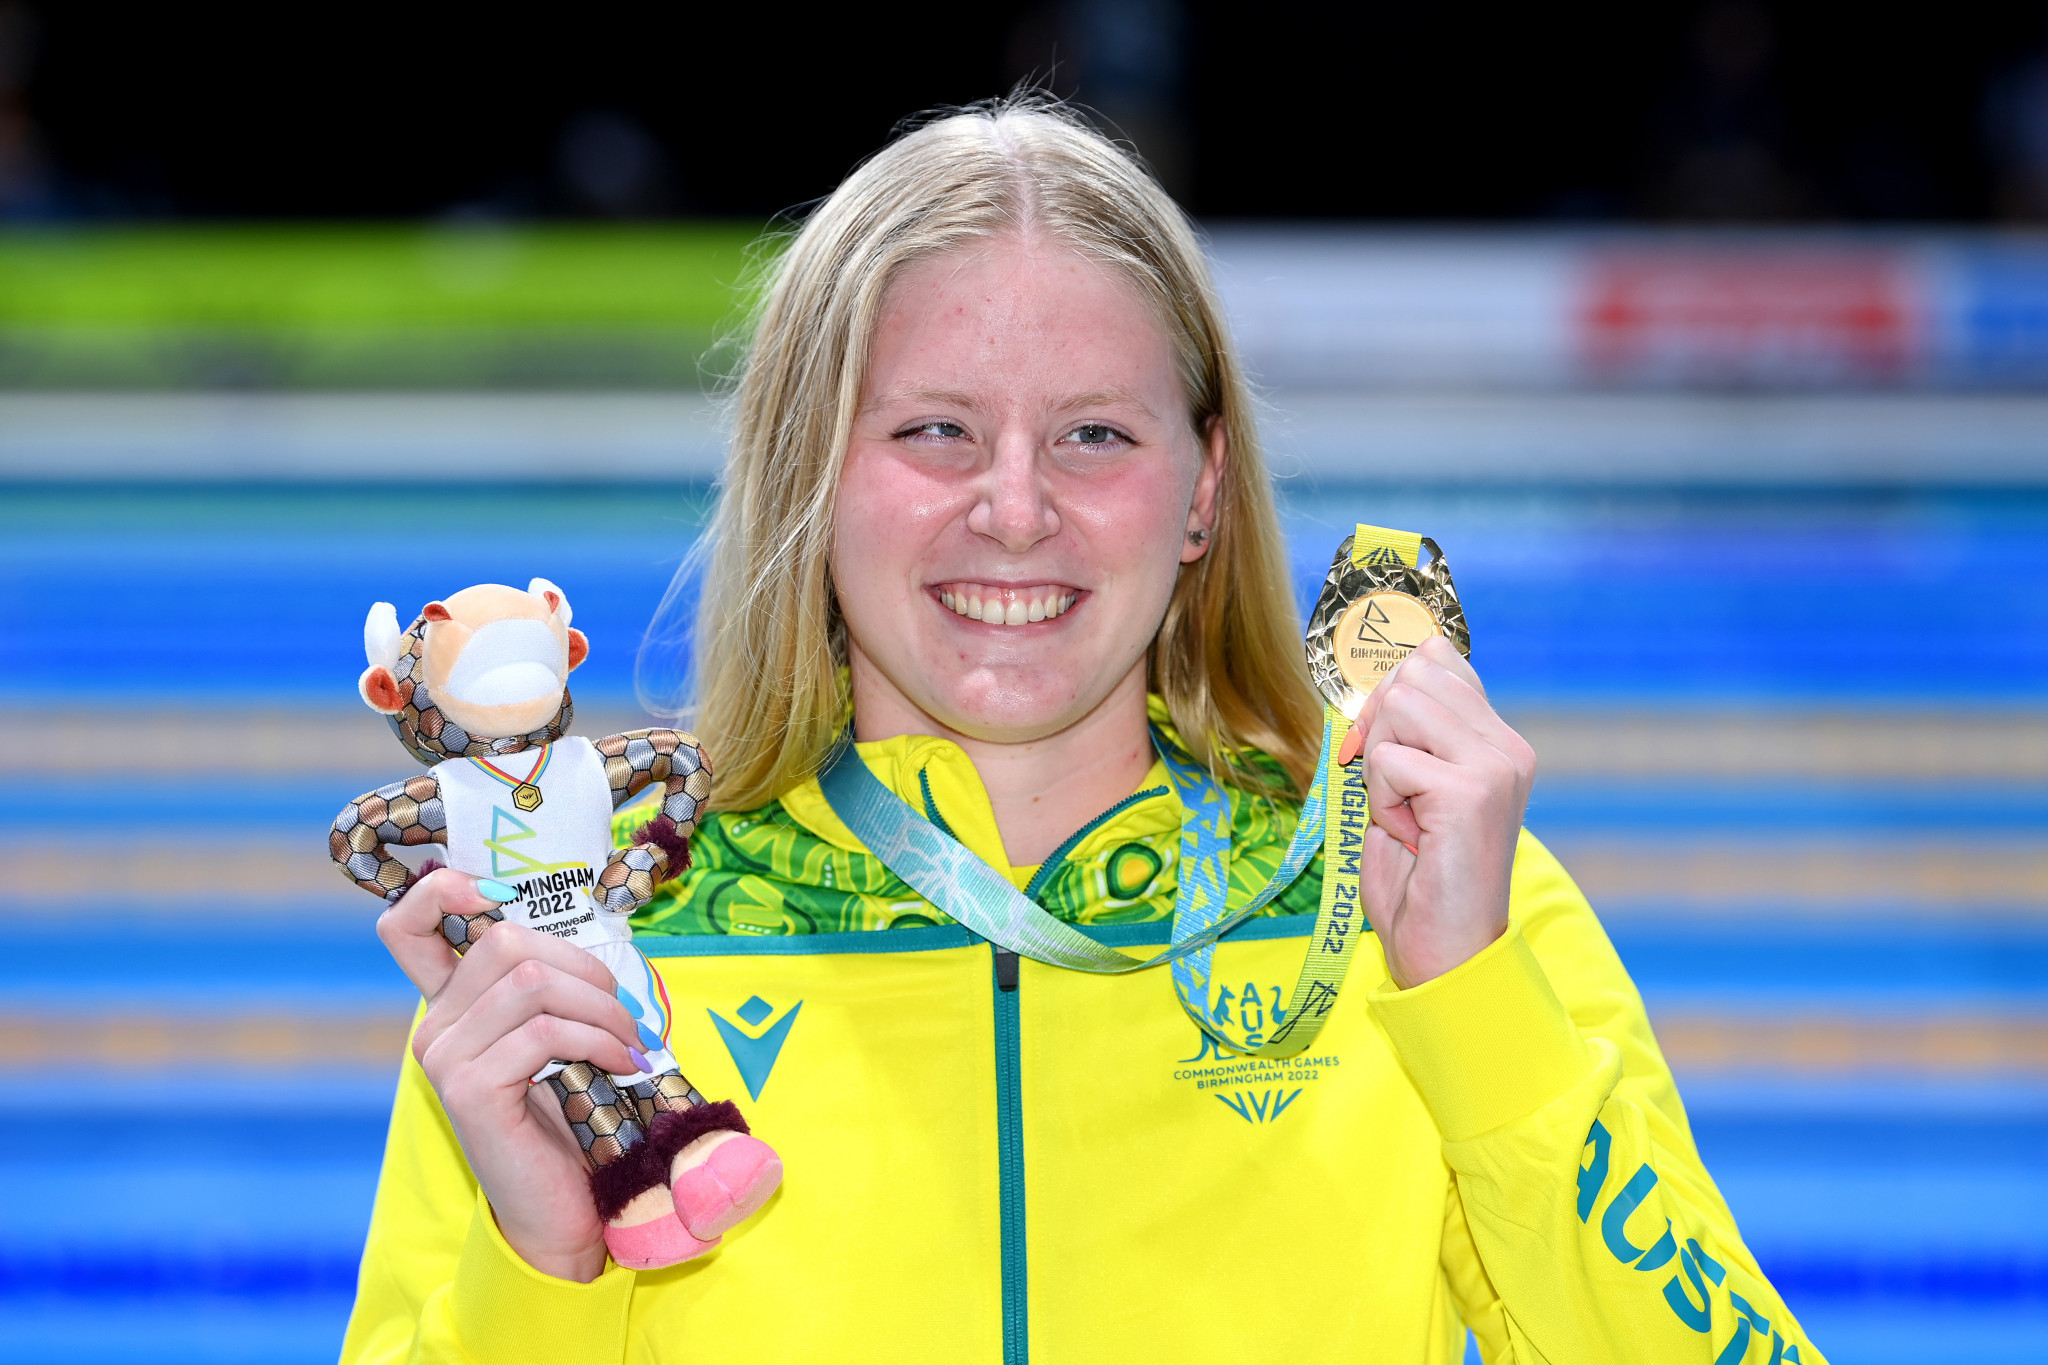 Dedekind world record among six swimming Commonwealth Games records set on second day